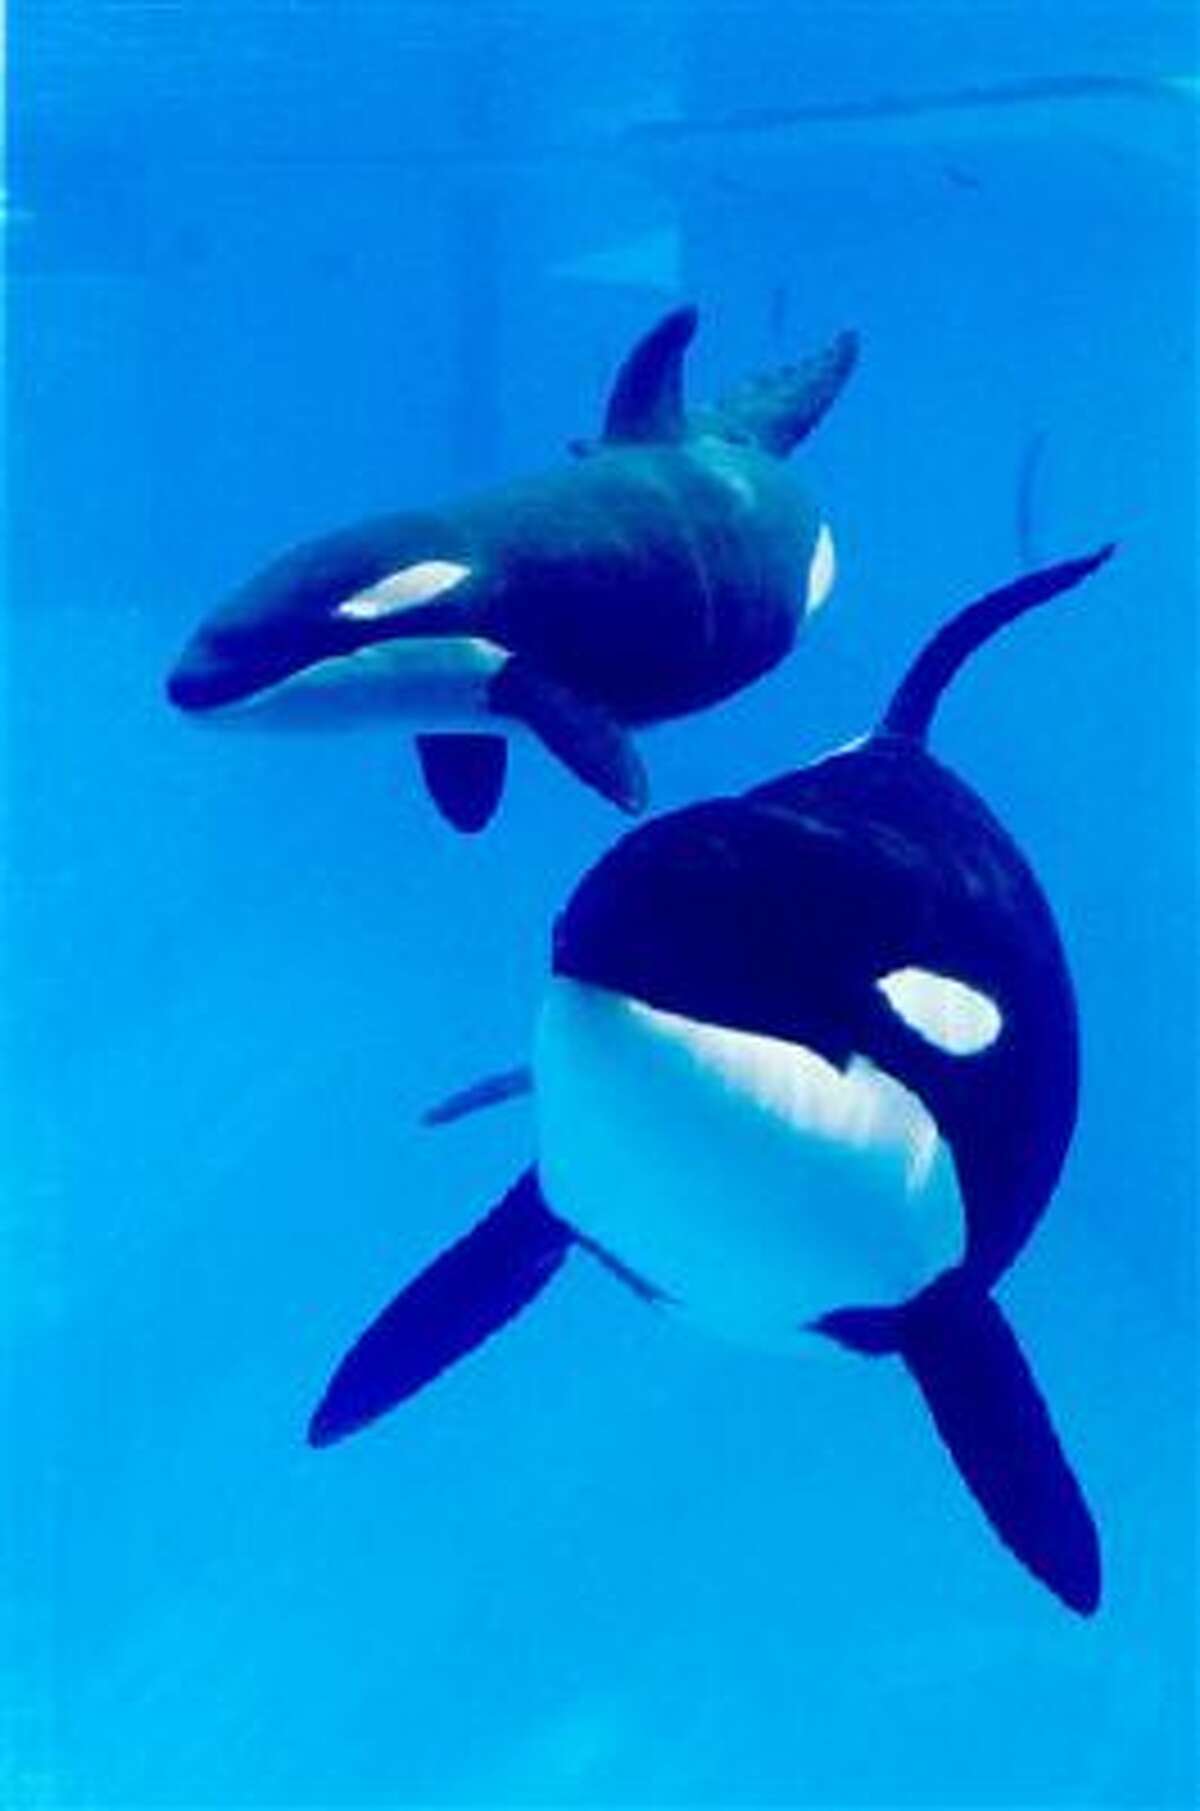 In this July 2, 1999 file photo, killer whale Kalina, right, and her 10-day-old son Baby Shamu swim at SeaWorld in Orlando, Fla. Floats in the Macy's Thanksgiving parade, which carry celebrities, beauty queens and dancing costumed characters, can usually be counted on to be controversy-free. Not this year. Parade organizers are the target of protests and a petition drive to drop a SeaWorld float over accusations in a new documentary that the parks treat killer whales poorly.